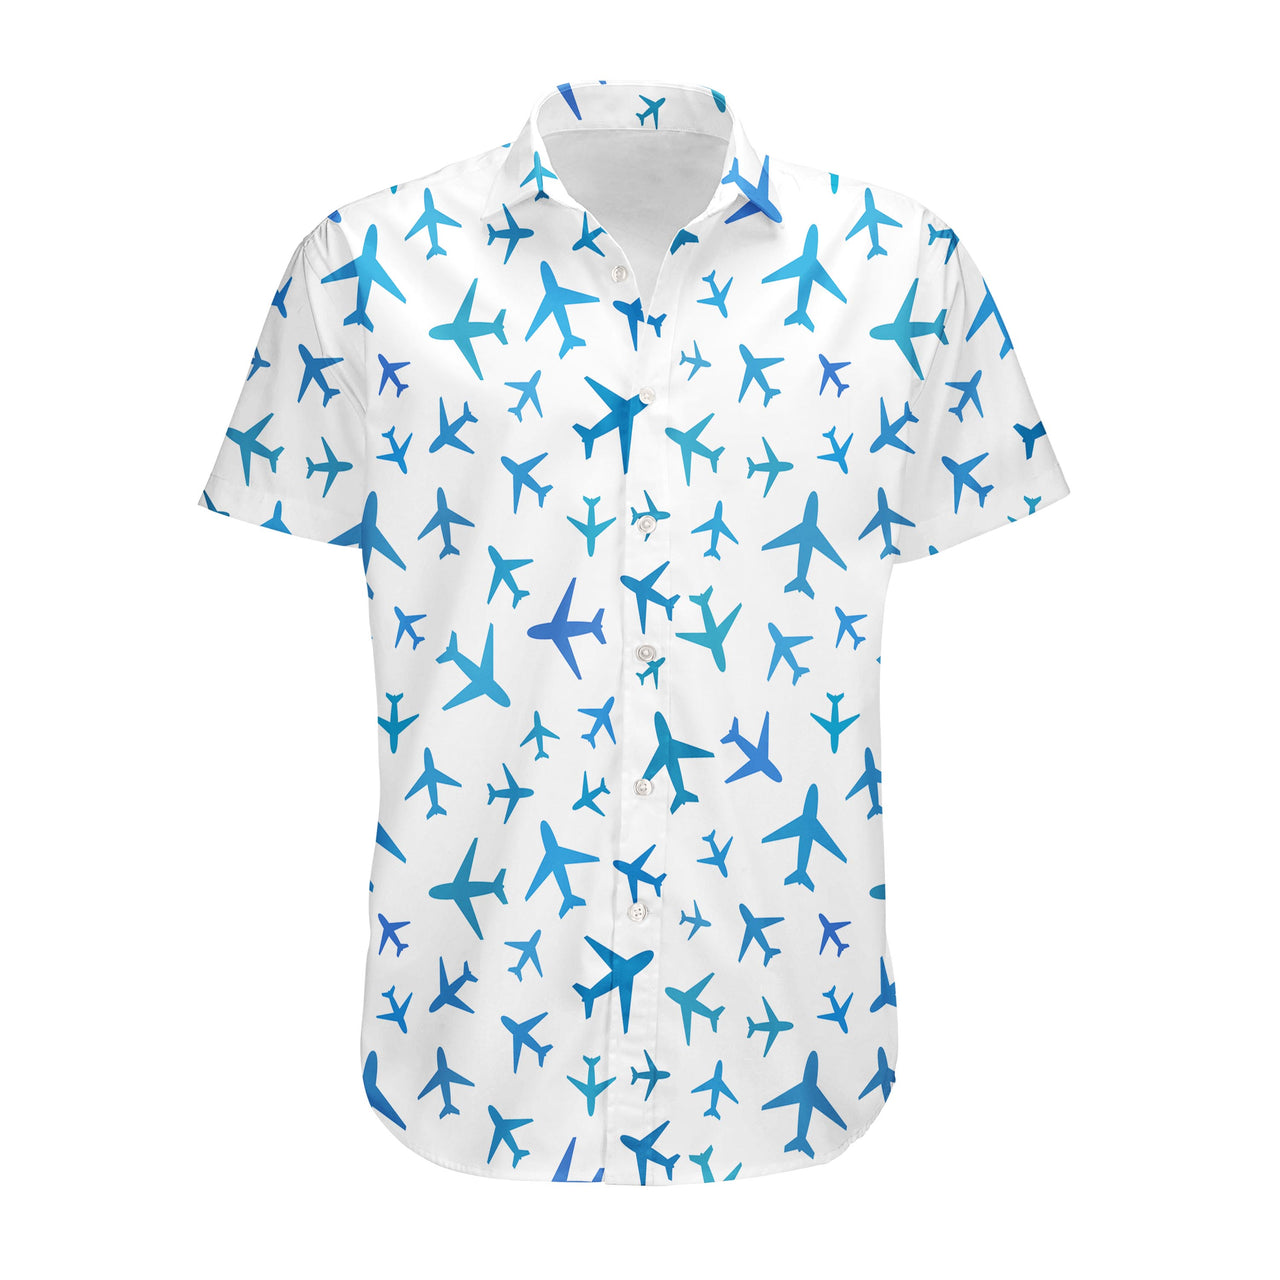 Many Airplanes Designed 3D Shirts